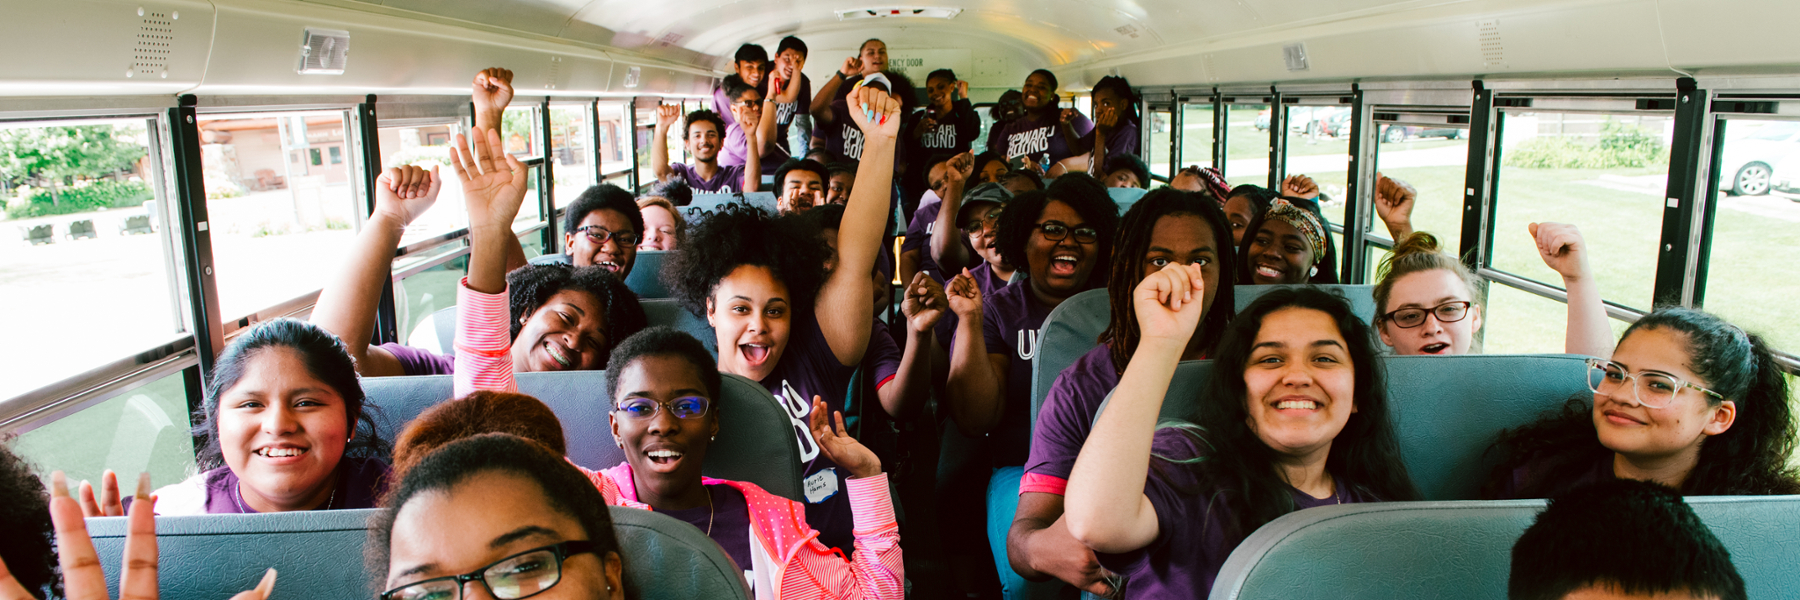 Upward Bound student smiling and raising their fists on a bus.